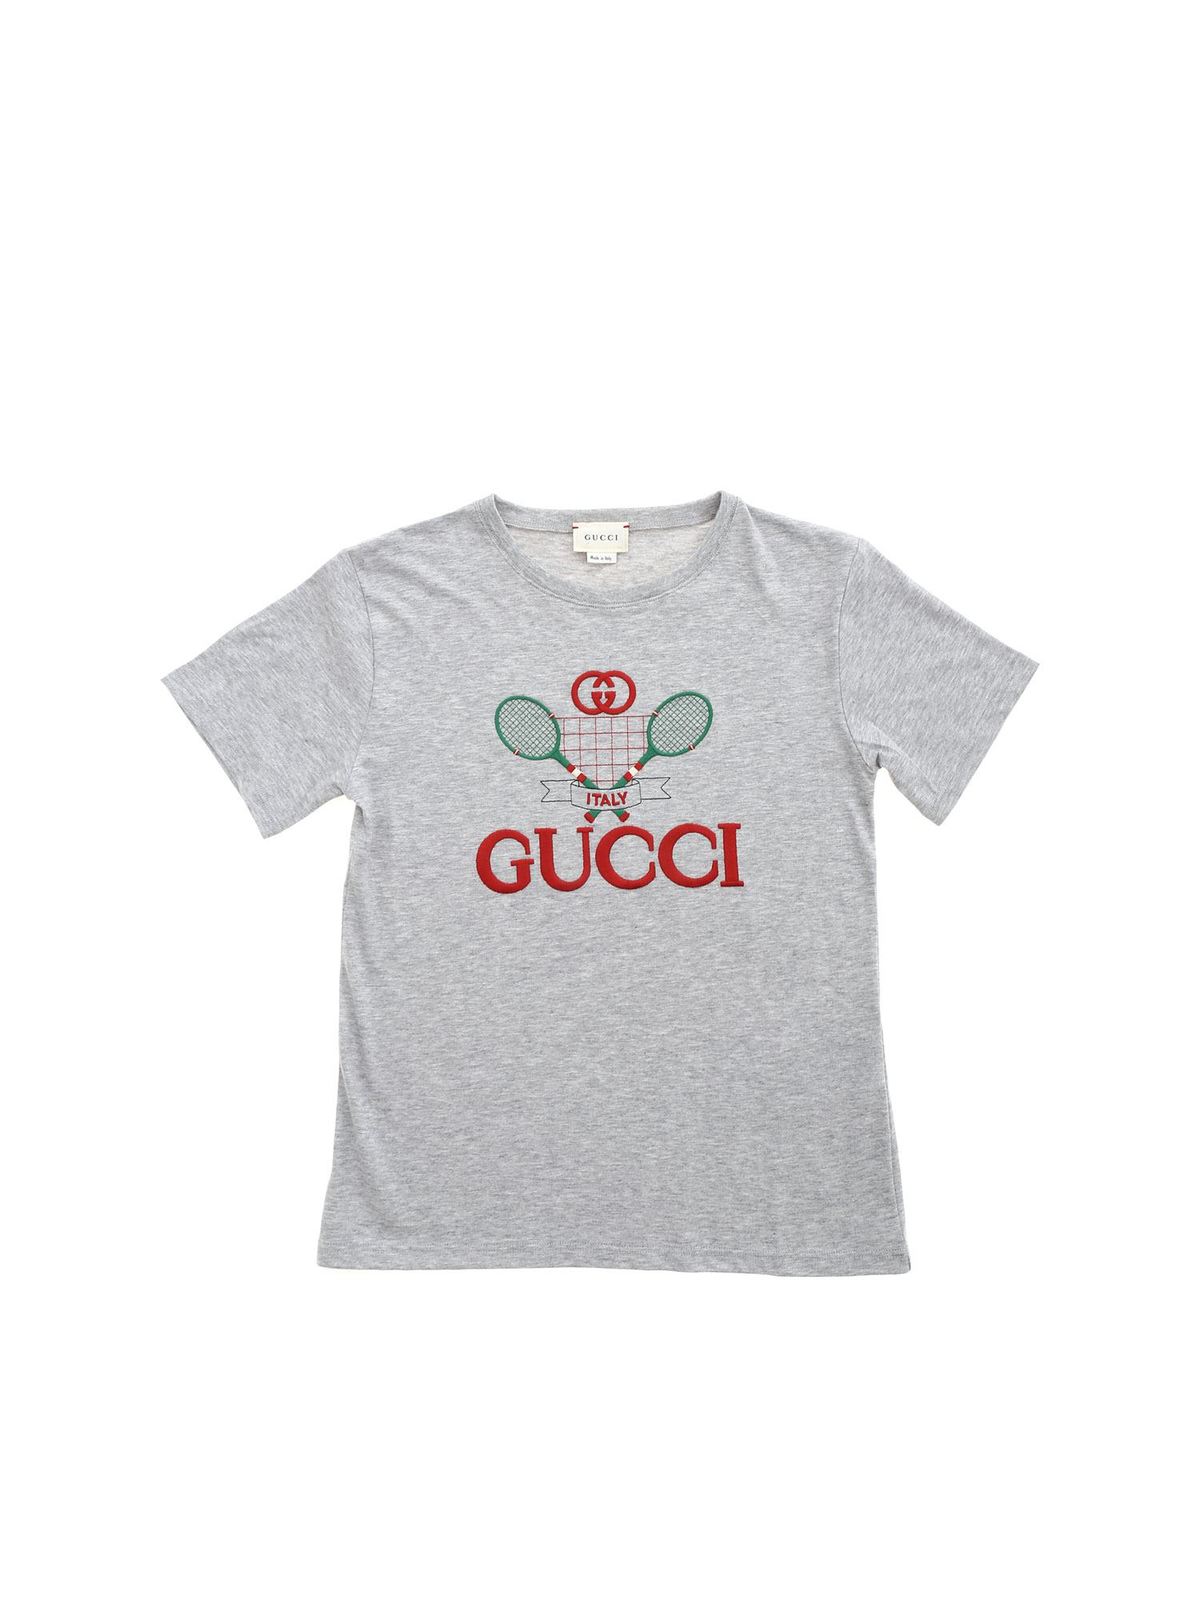 GUCCI LOGO EMBROIDERY T-SHIRT